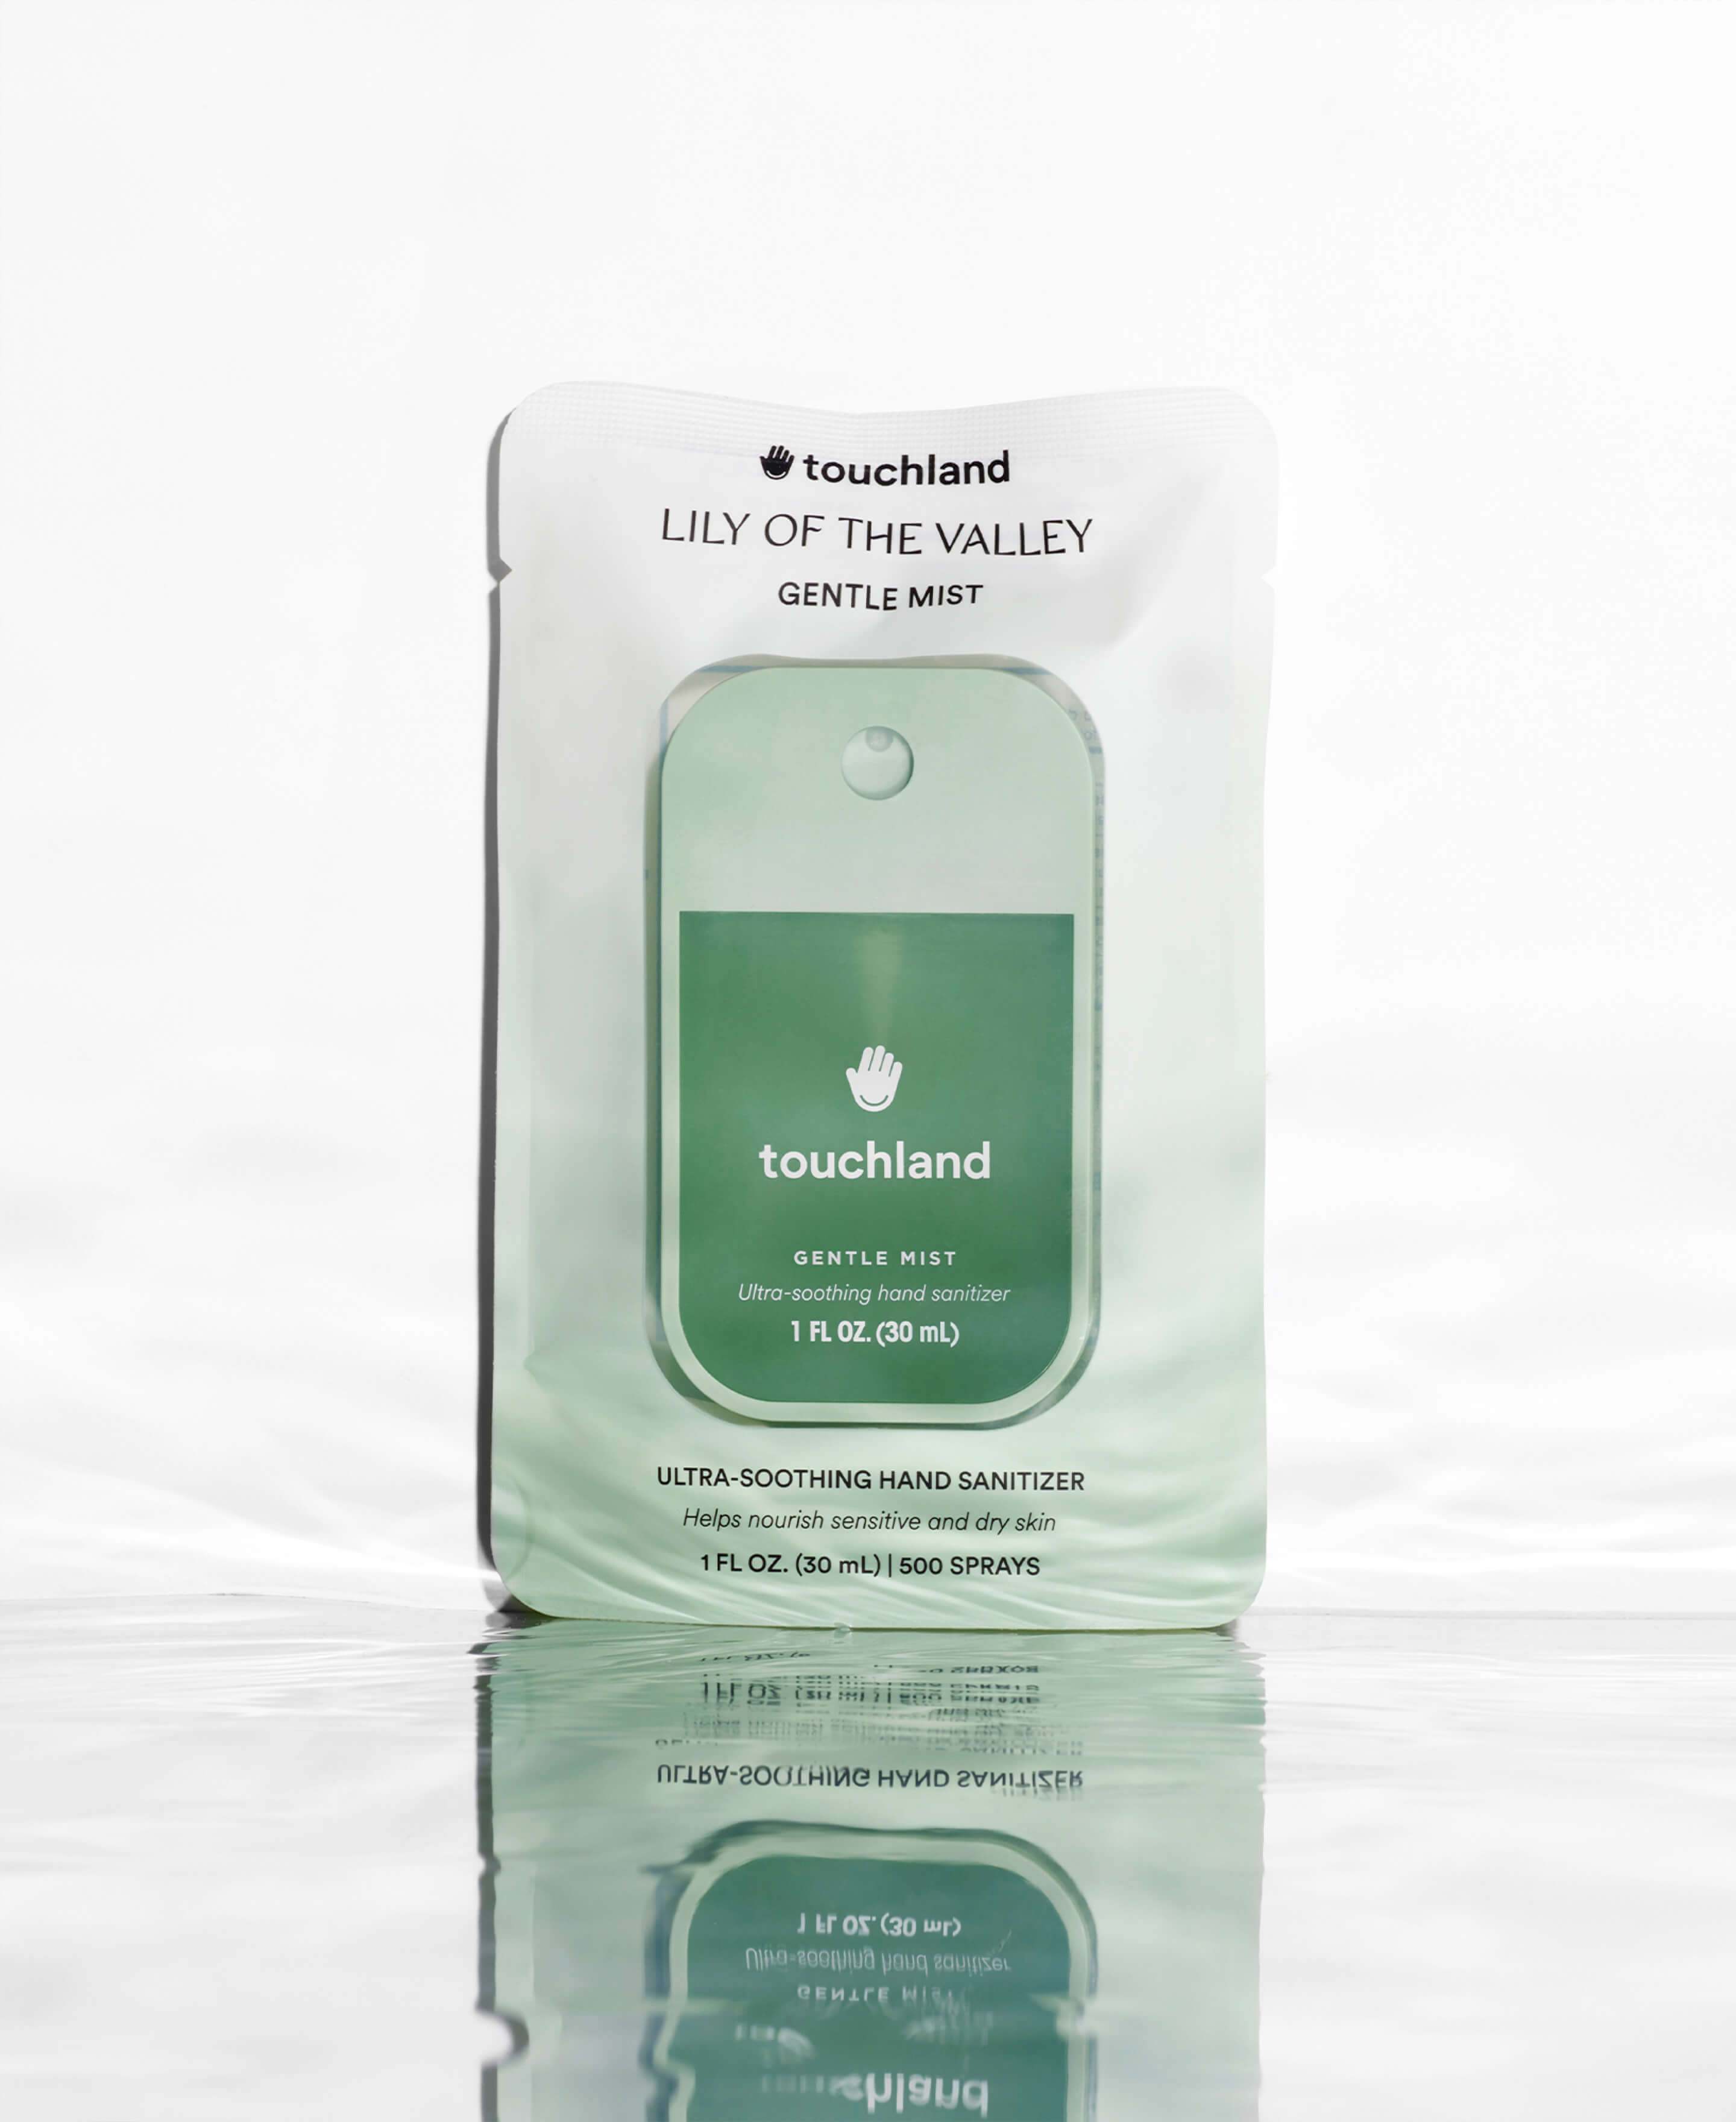 Lily of the Valley Gentle Mist in packaging!